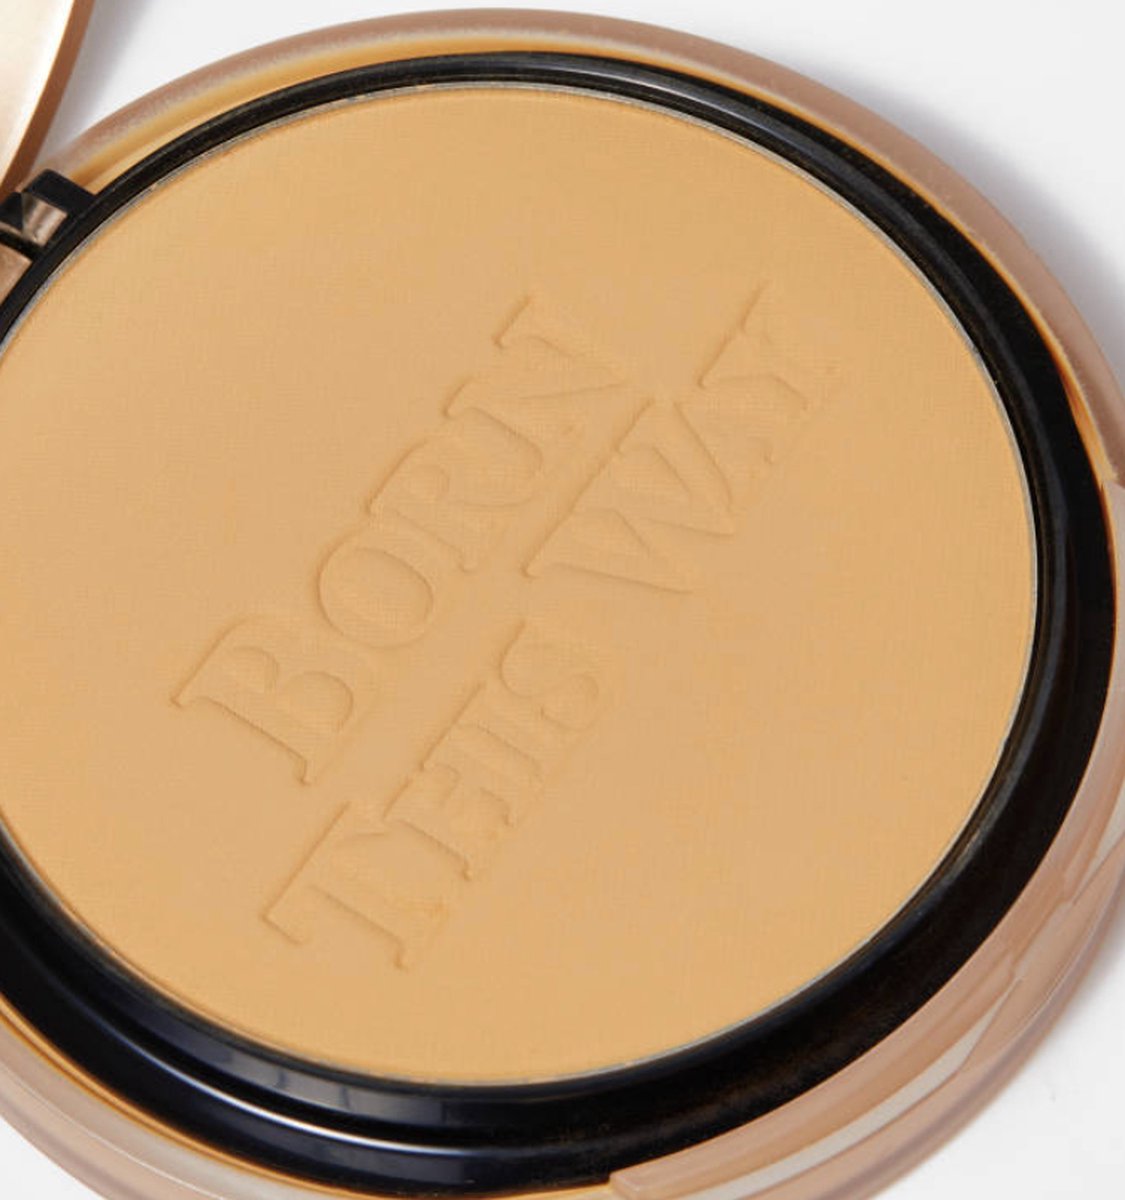 Too Faced Born This Way Multi Use Complexion Powder - Latte